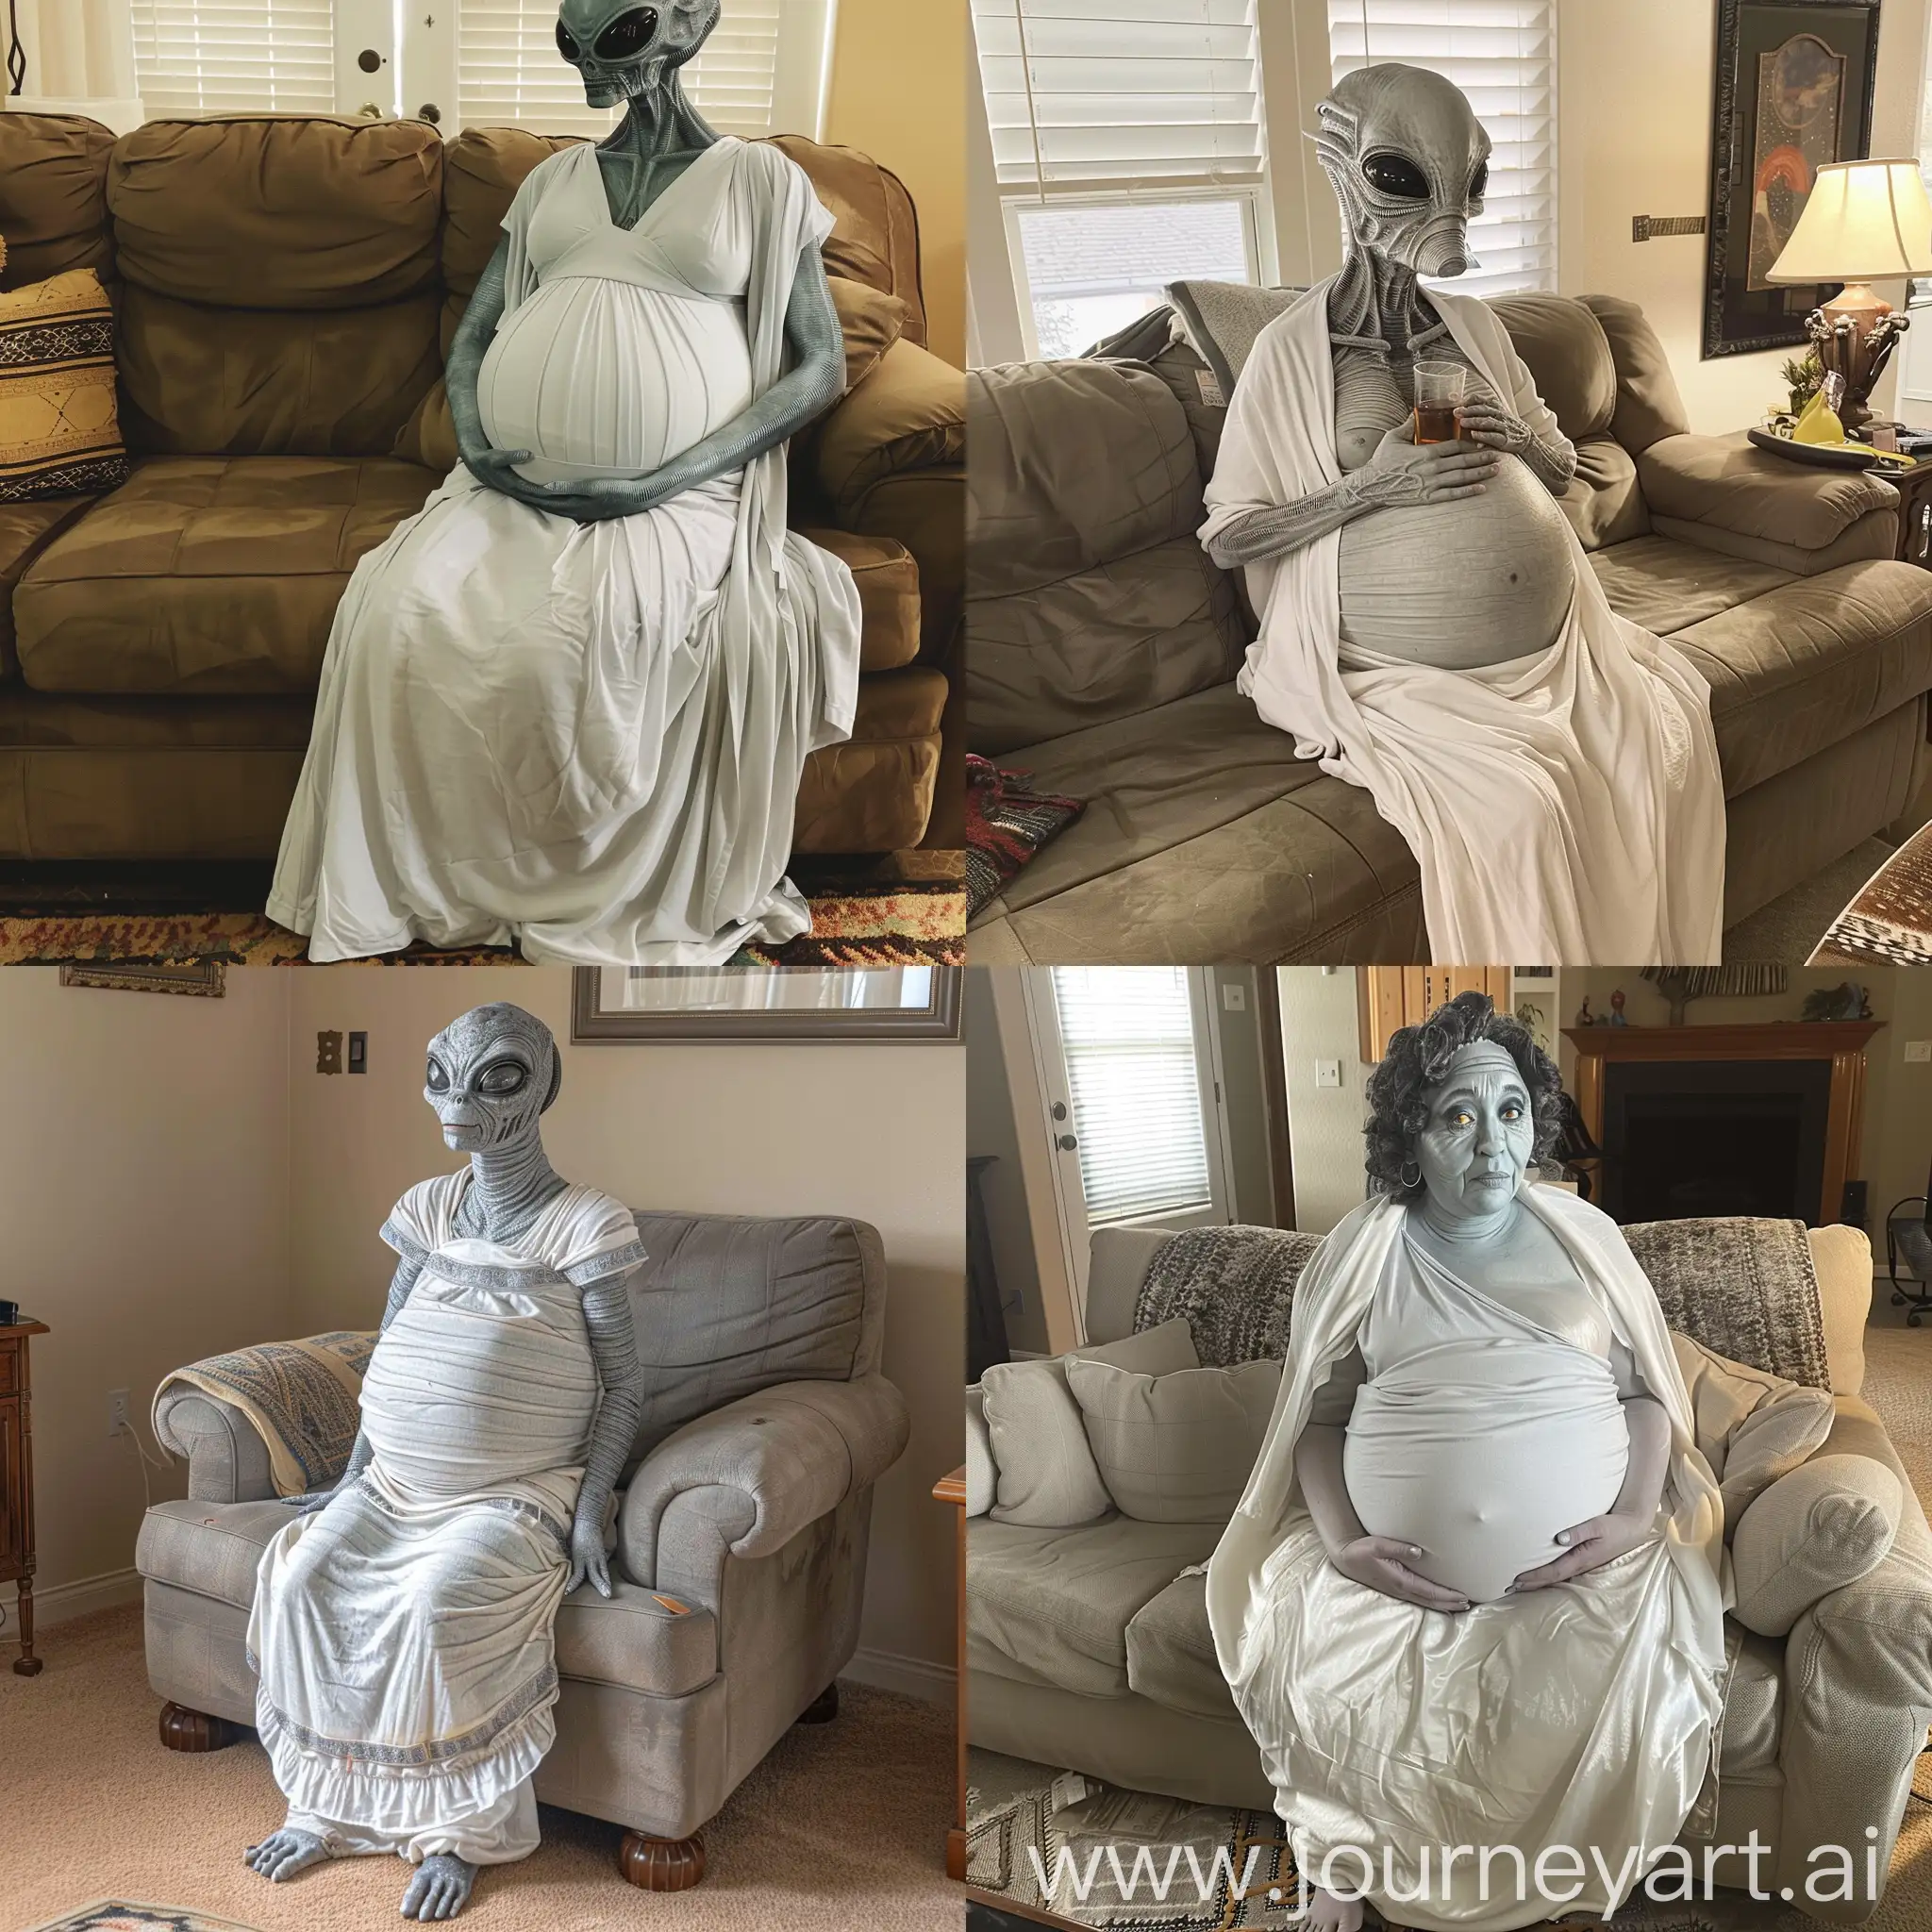 A very pregnant female gray Alien in a white toga, Her pregnant tummy is very large. The alien is pregnant with Triplets, And has a large bust. 6'11" in height. She is sitting on your couch in your living room.